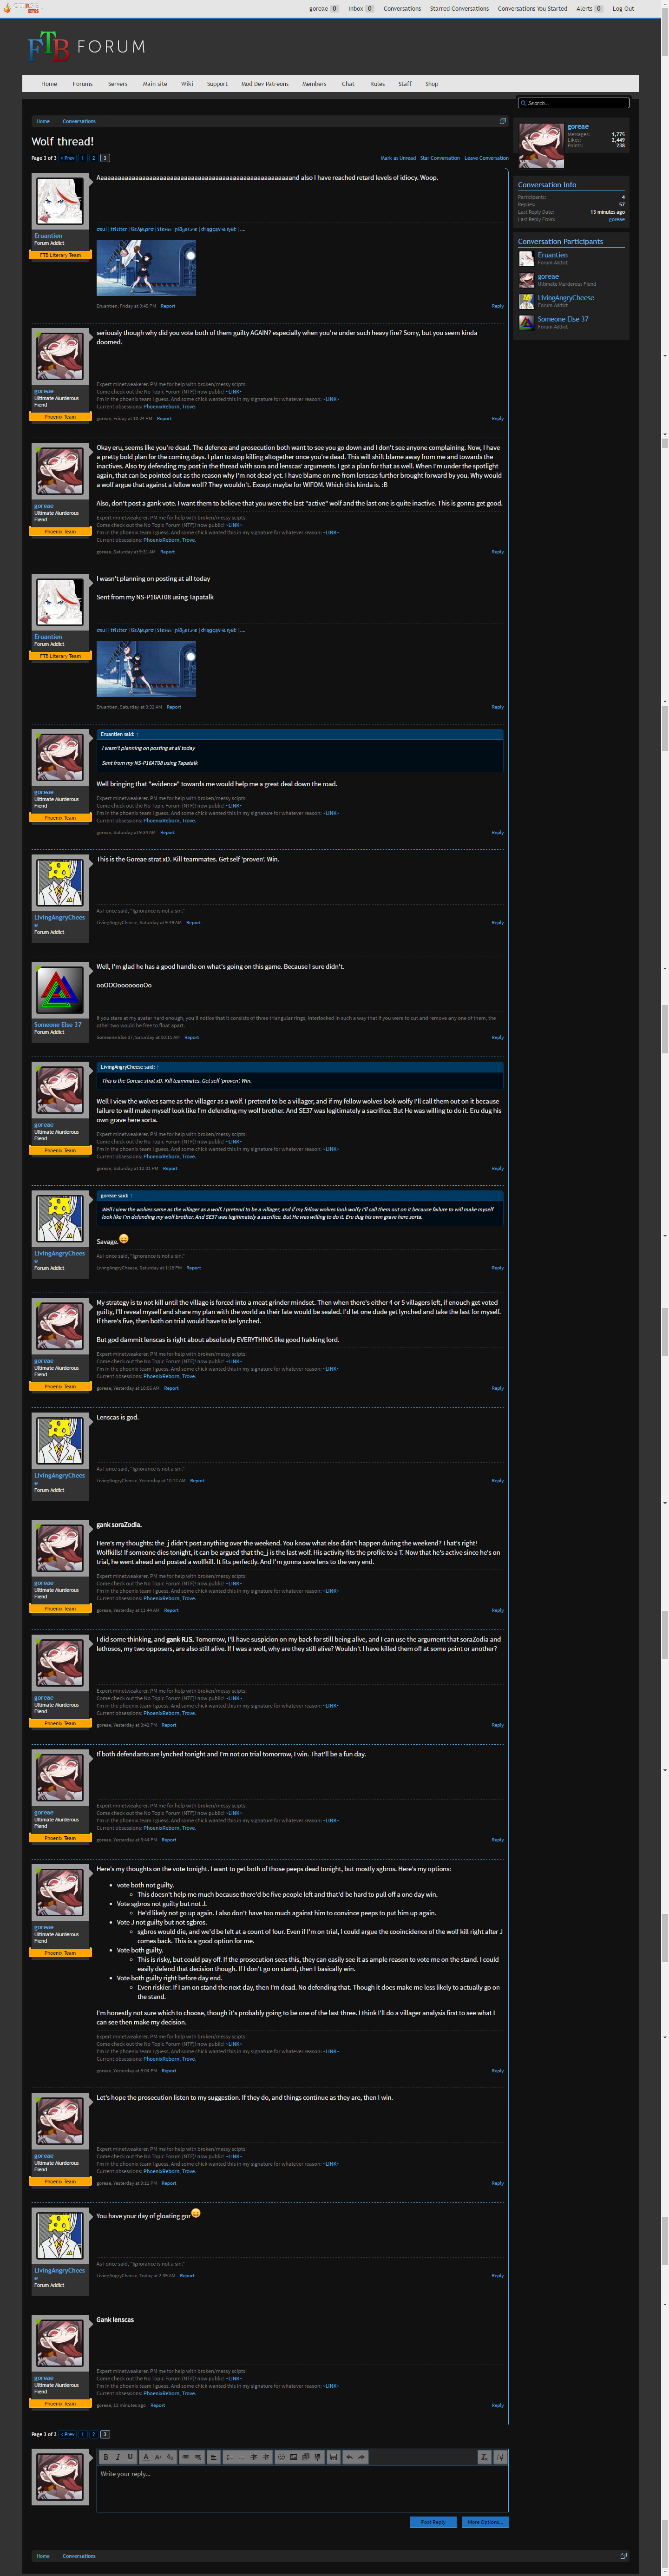 screencapture-forum-feed-the-beast-com-conversations-wolf-thread-45068-page-3-1459870972826.png